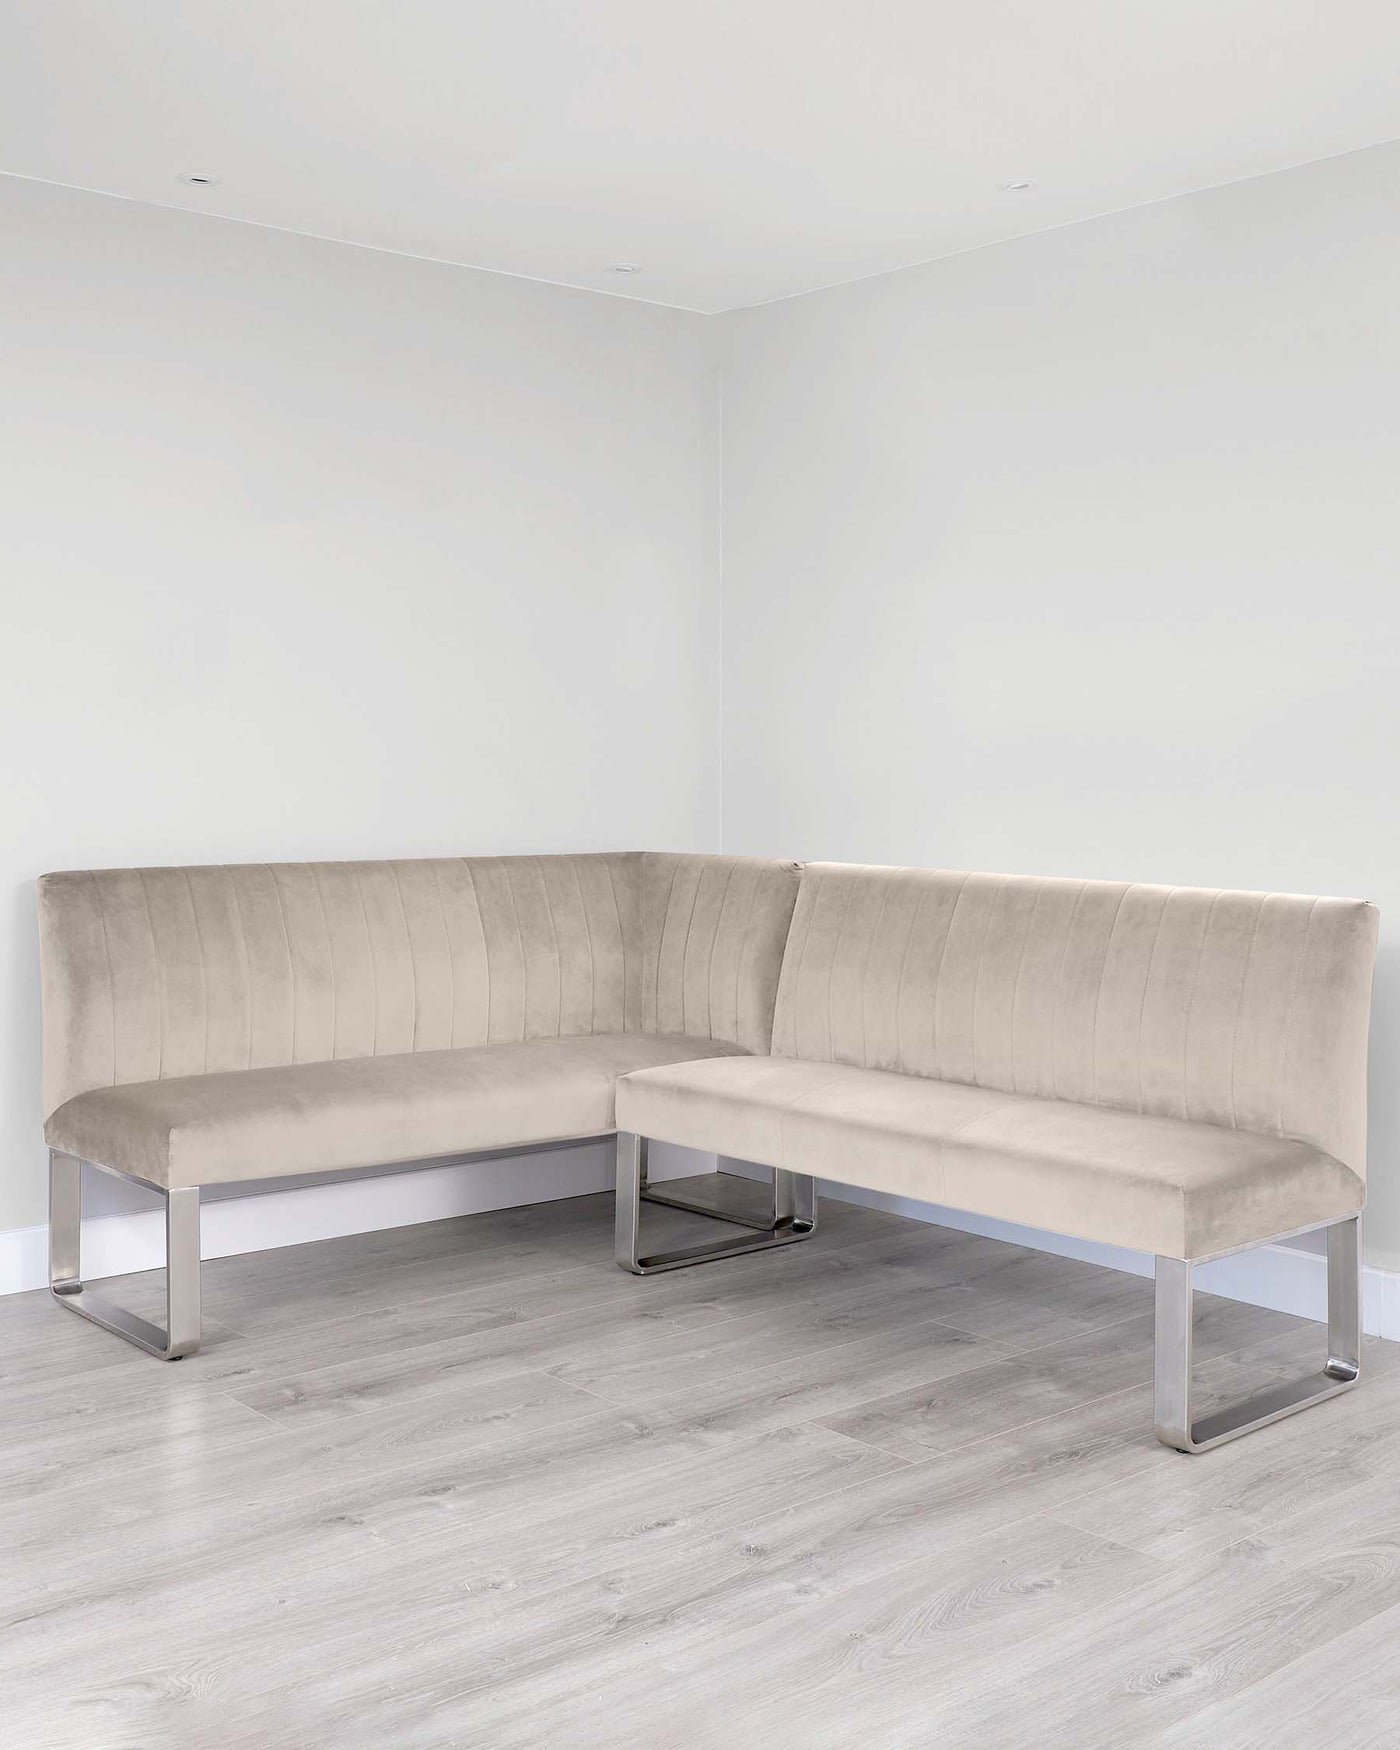 Modern L-shaped sectional bench with a plush, tufted velvet fabric in a neutral beige tone, featuring a clean-lined design supported by sleek, chrome-finished metal legs.